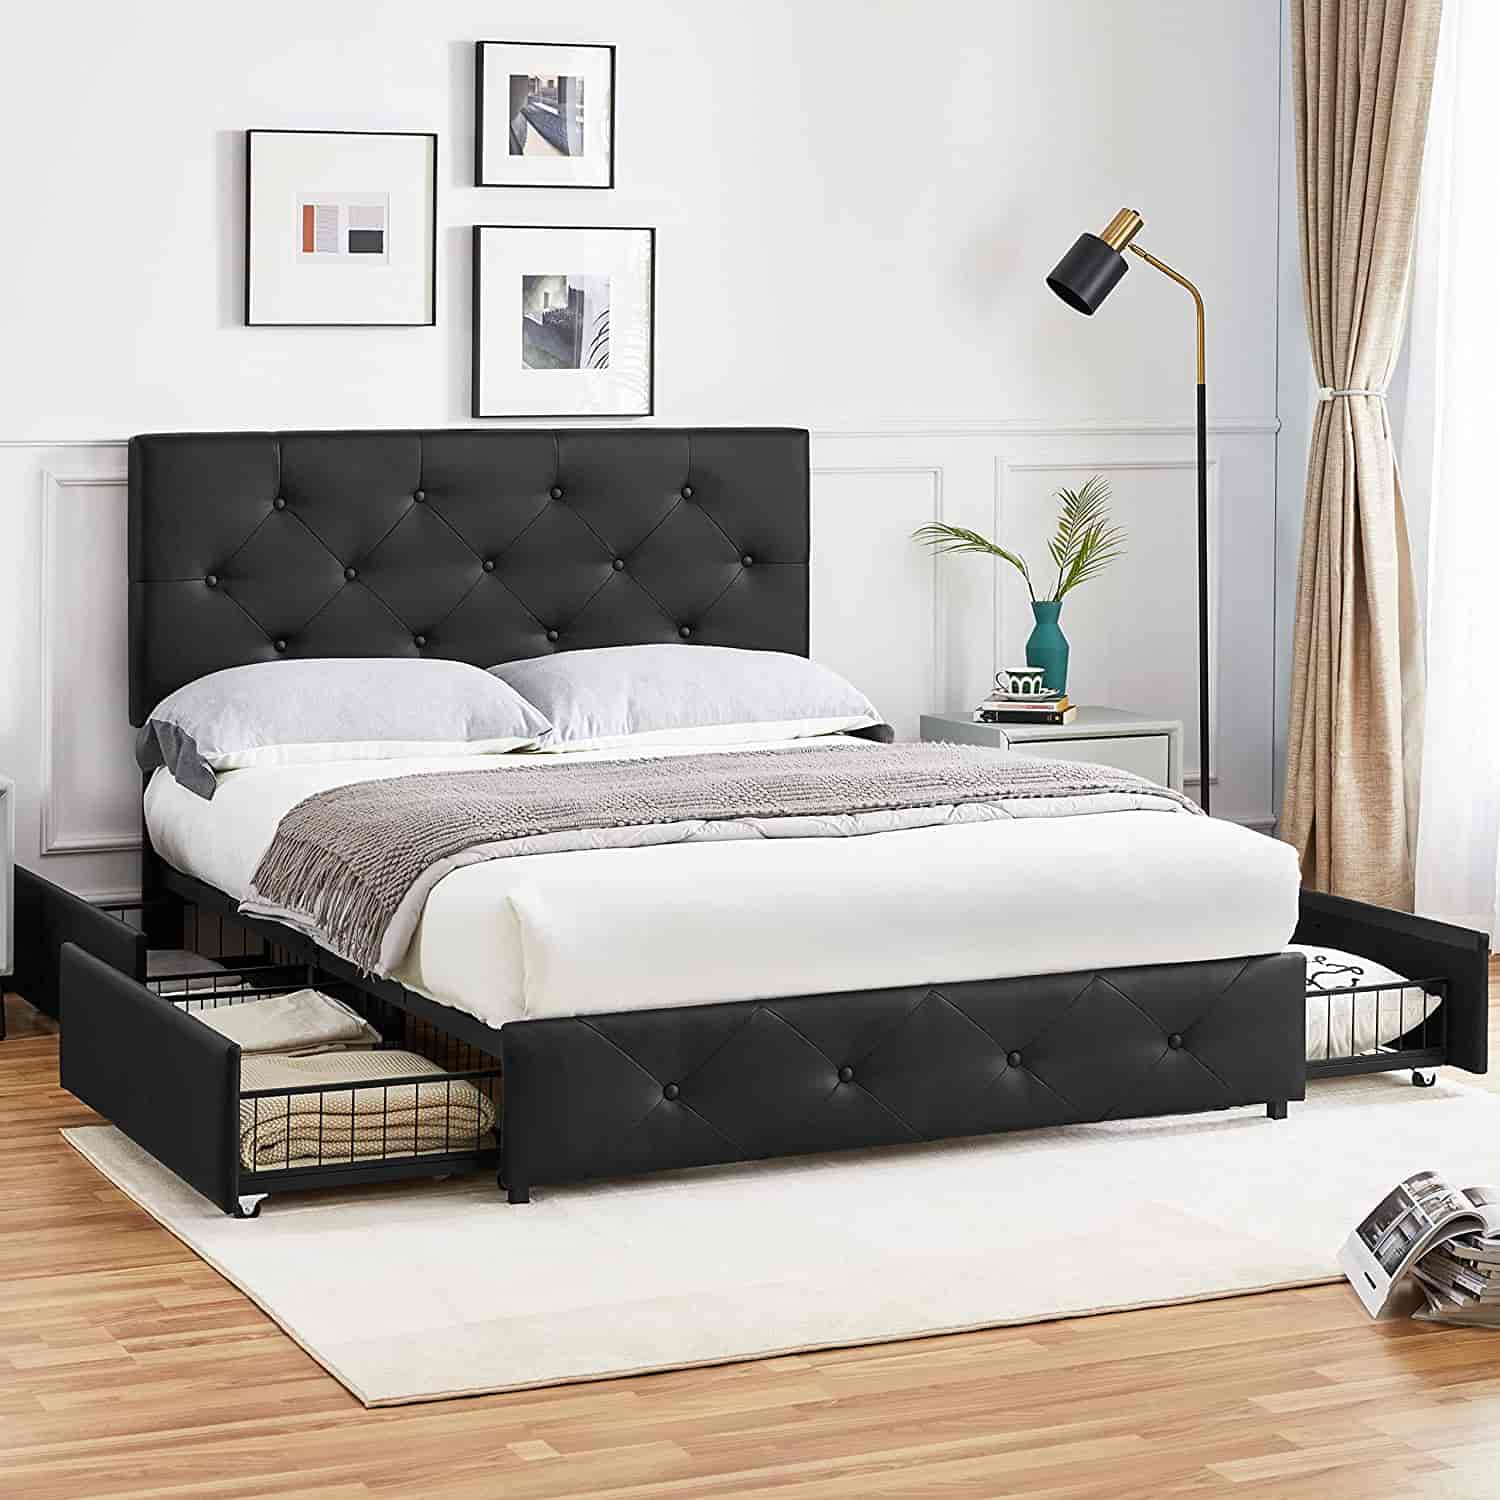 Best Upholstered Platform Bed Frame with Height Adjustable Headboard and 4 Storage Drawers